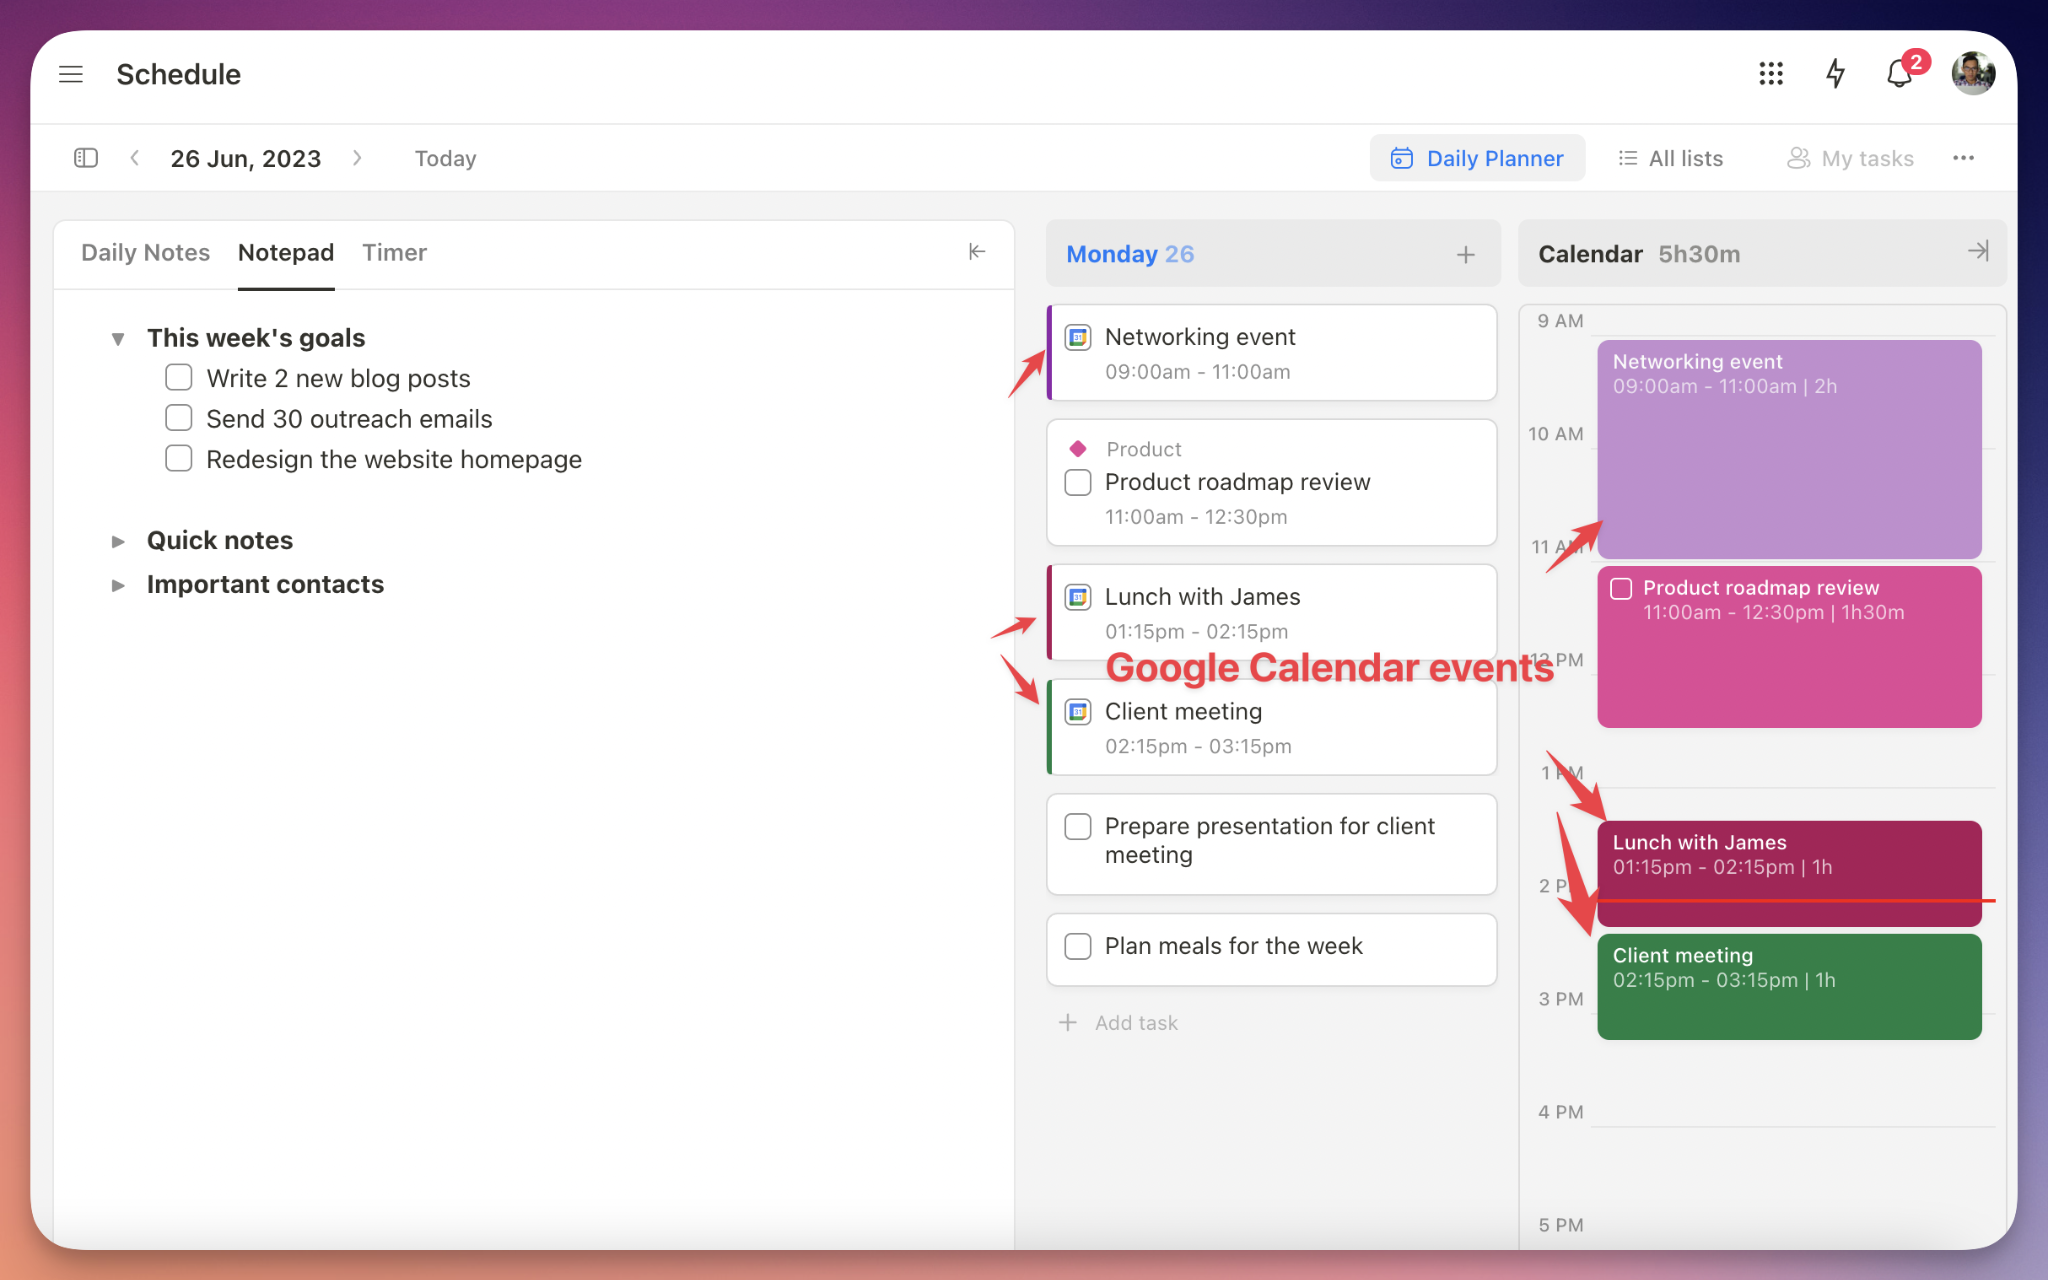 Upbase preserves the original color-coding of Google Calendar events when displaying them on its calendars and planners